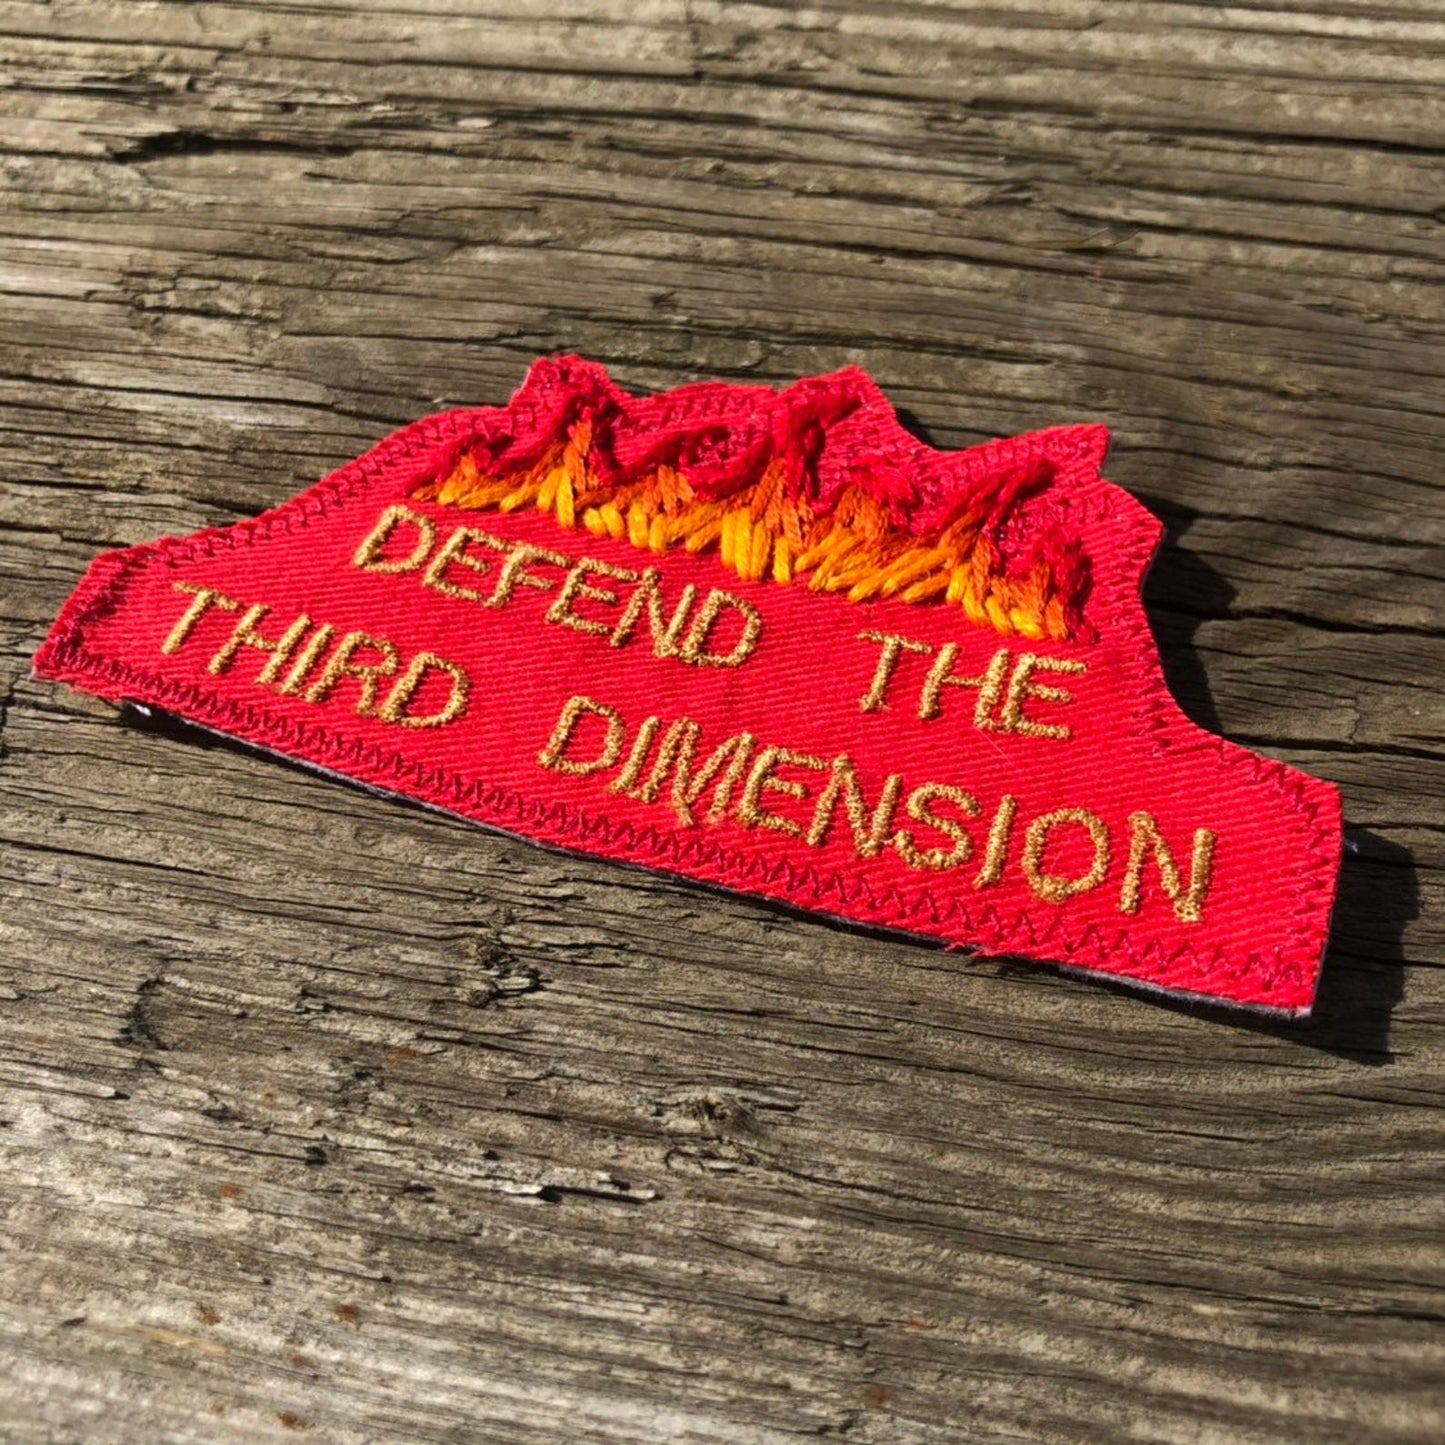 Dimensional Defense Department. Hand Embroidered Canvas Patch